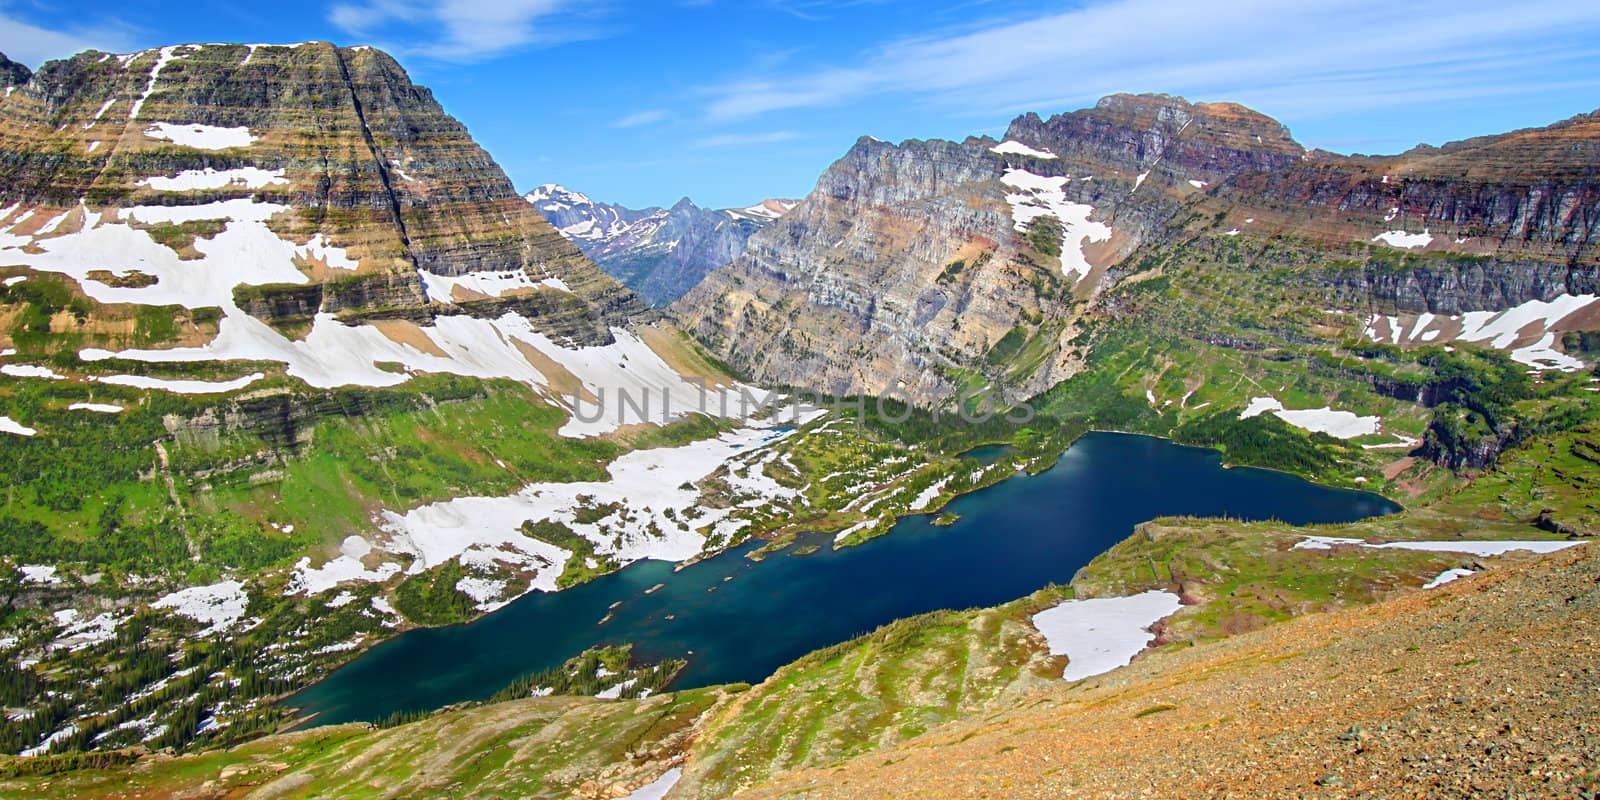 Hidden Lake and alpine scenery of Glacier National Park seen from elevation.